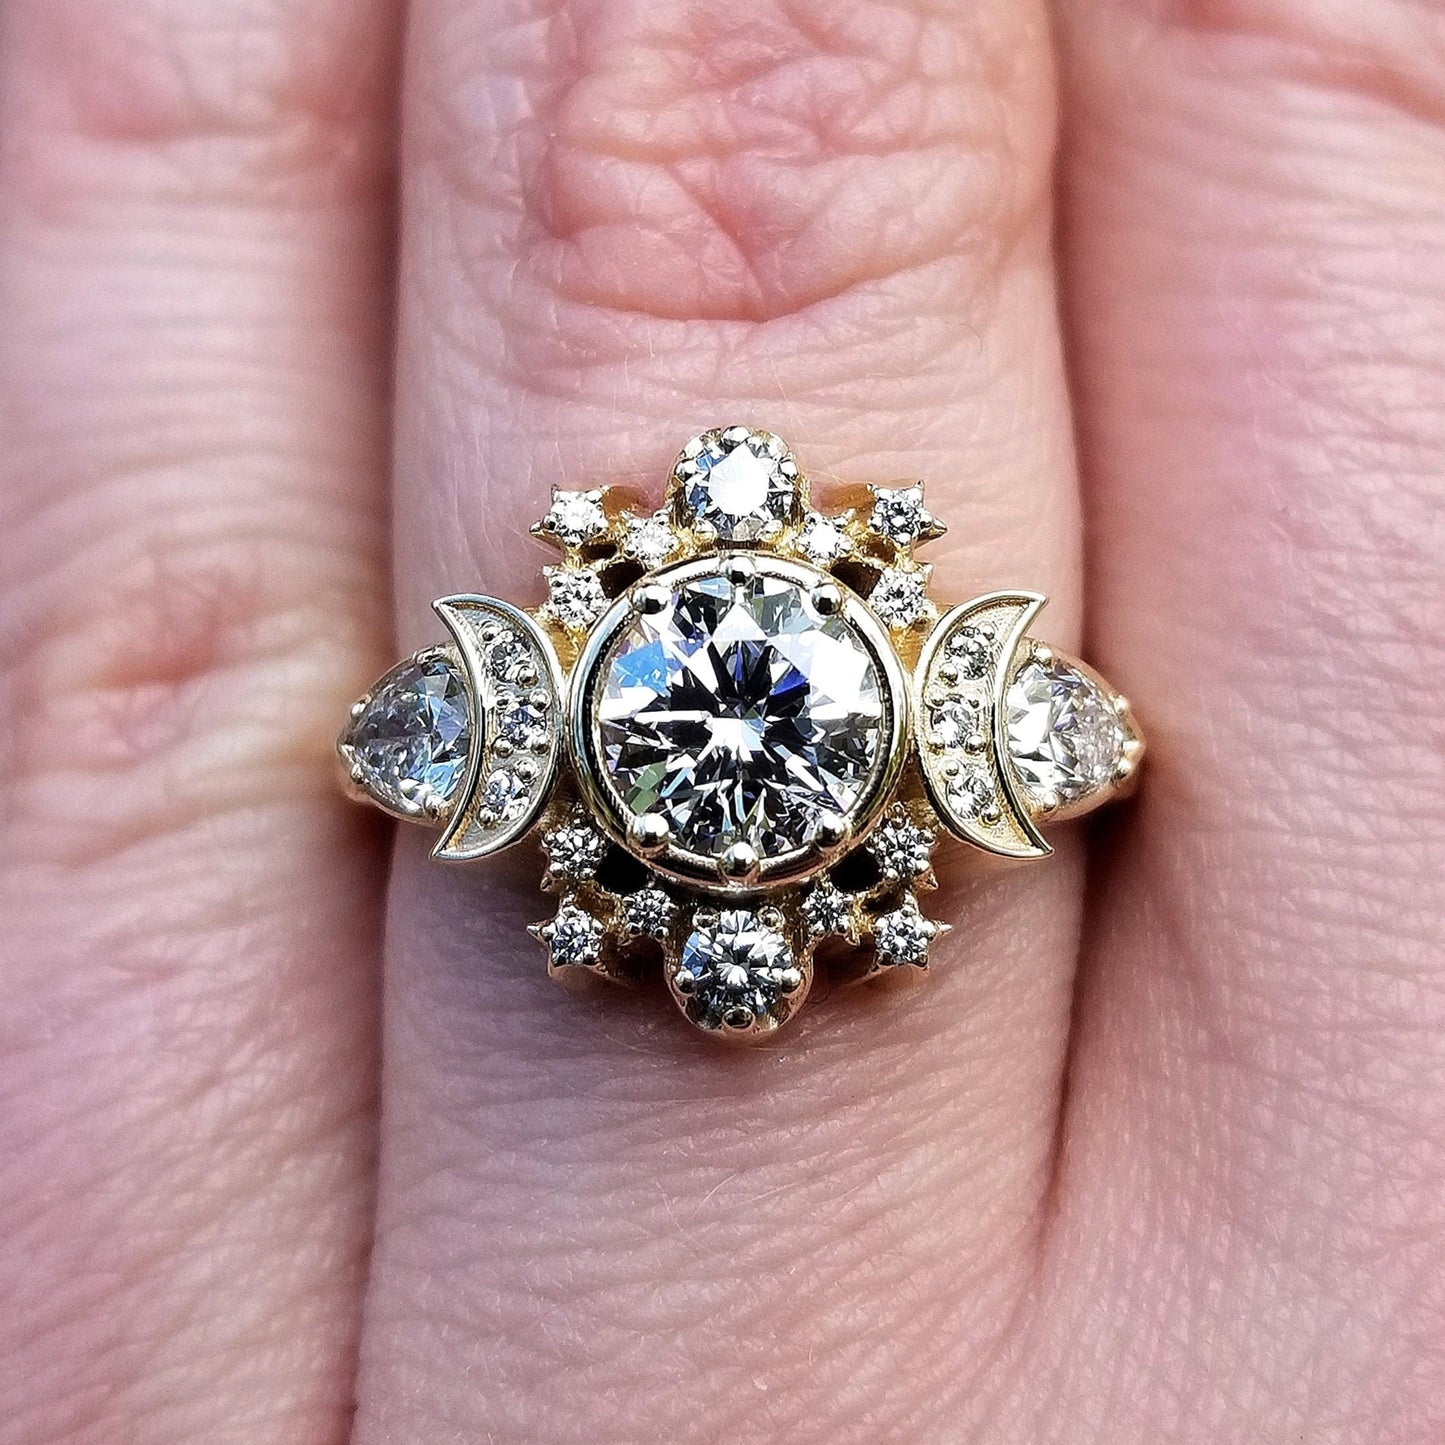 Ready to Ship Size 6-8 - Infinite Cosmos Engagement Ring with Diamond Stars and Crescent Moons - Unique Modern Wedding Ceremony Ring 14k Gold 1 Carat Diamond Ring